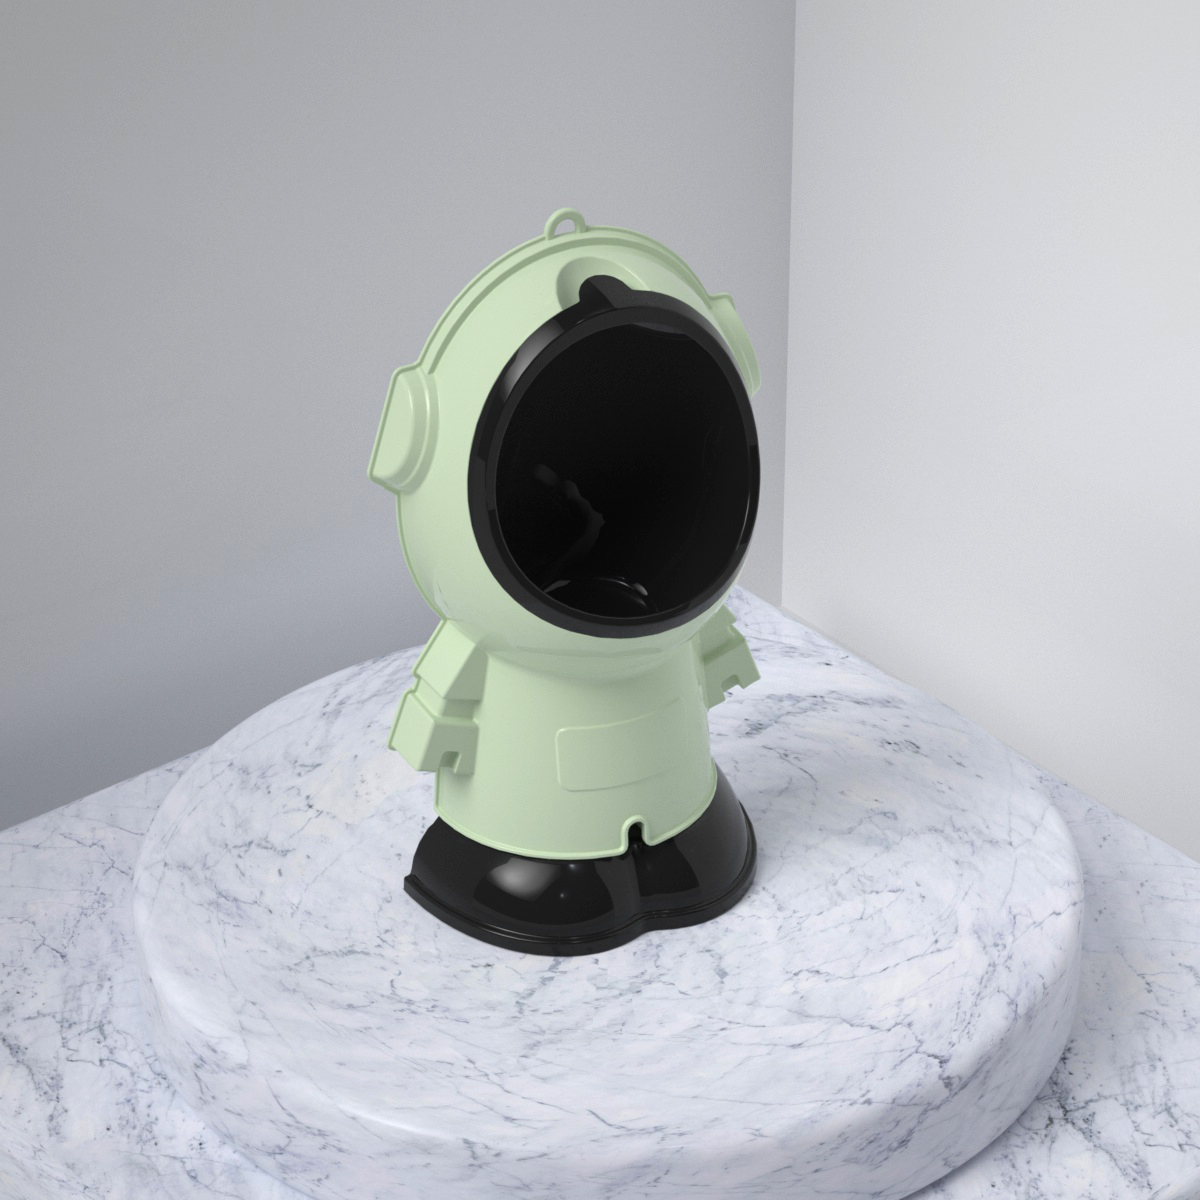 Robot Design Urinal For Baby